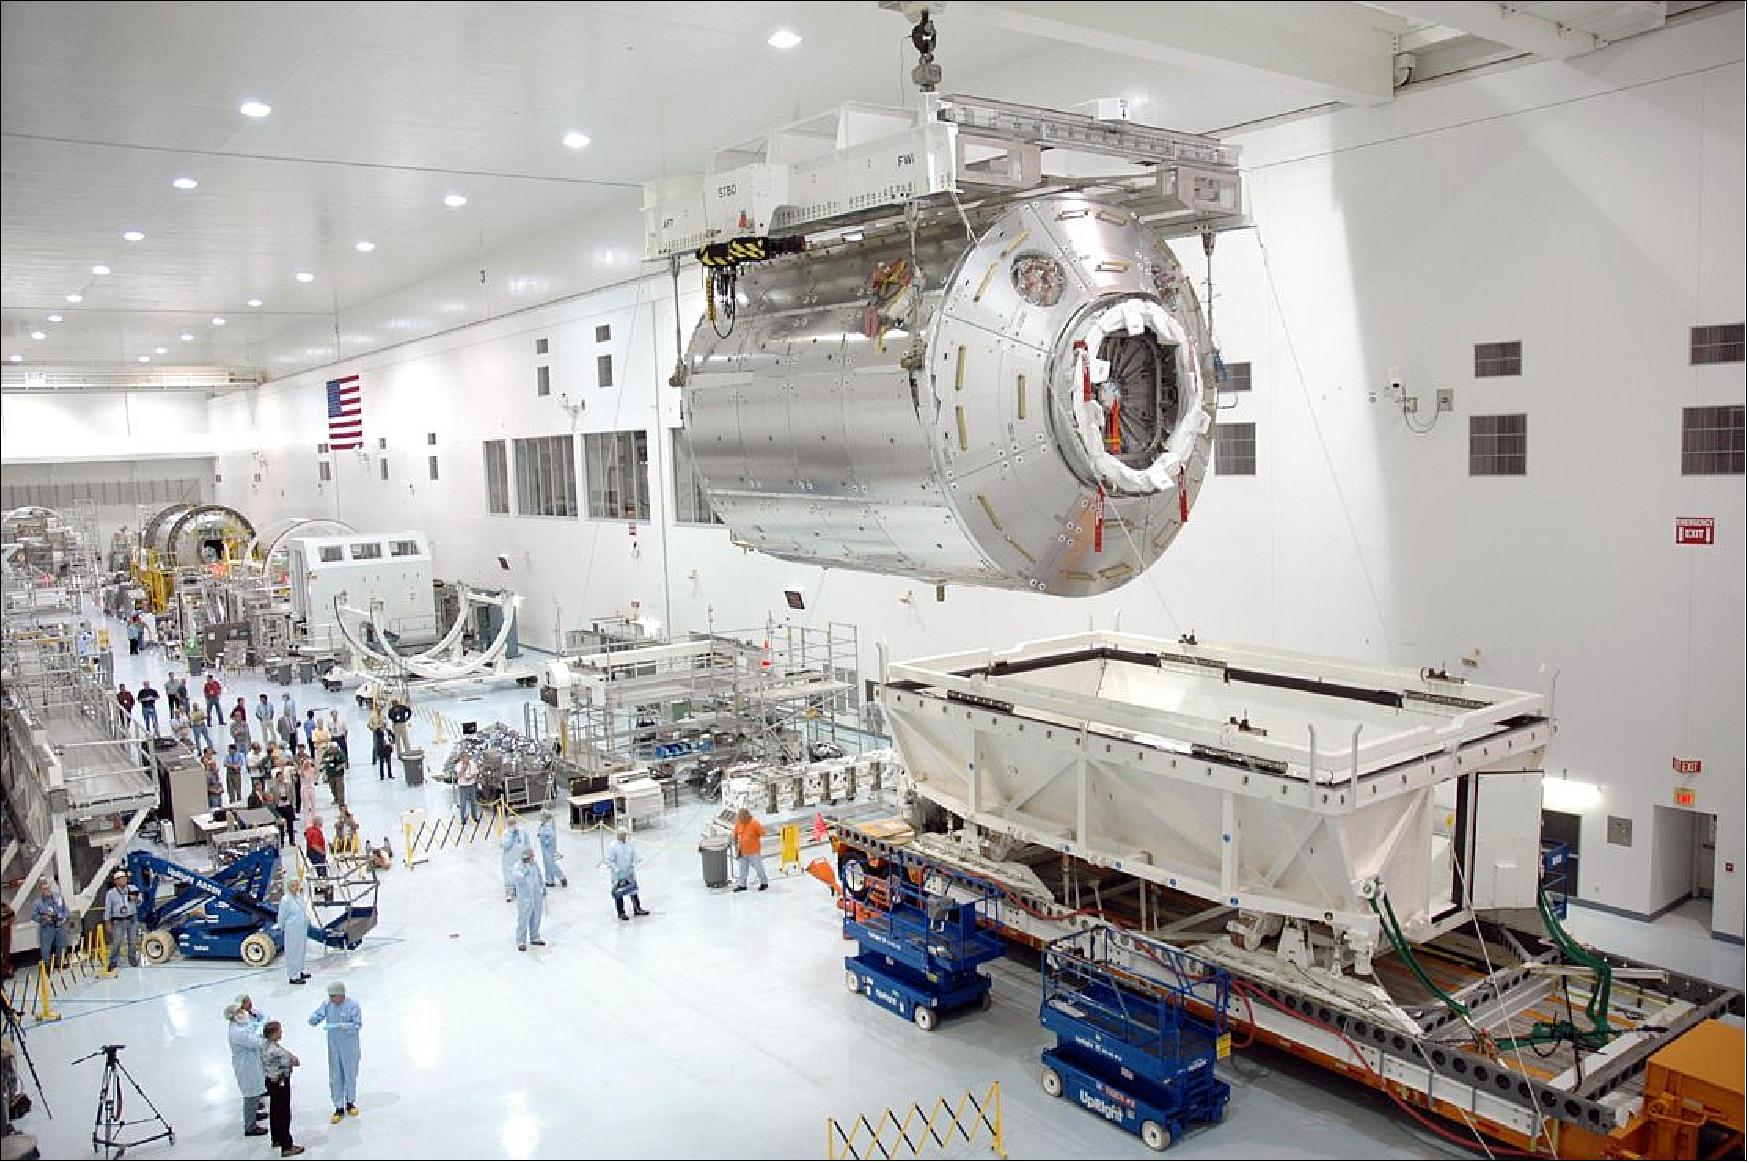 Figure 25: The Columbus research module is lowered onto a work stand at the launch site. This image of Columbus was taken in the summer of 2006, shortly after the module arrived at the launch site. Teams at NASA put Columbus through its final paces to ensure it was airtight and ready for flight (image credit: NASA)